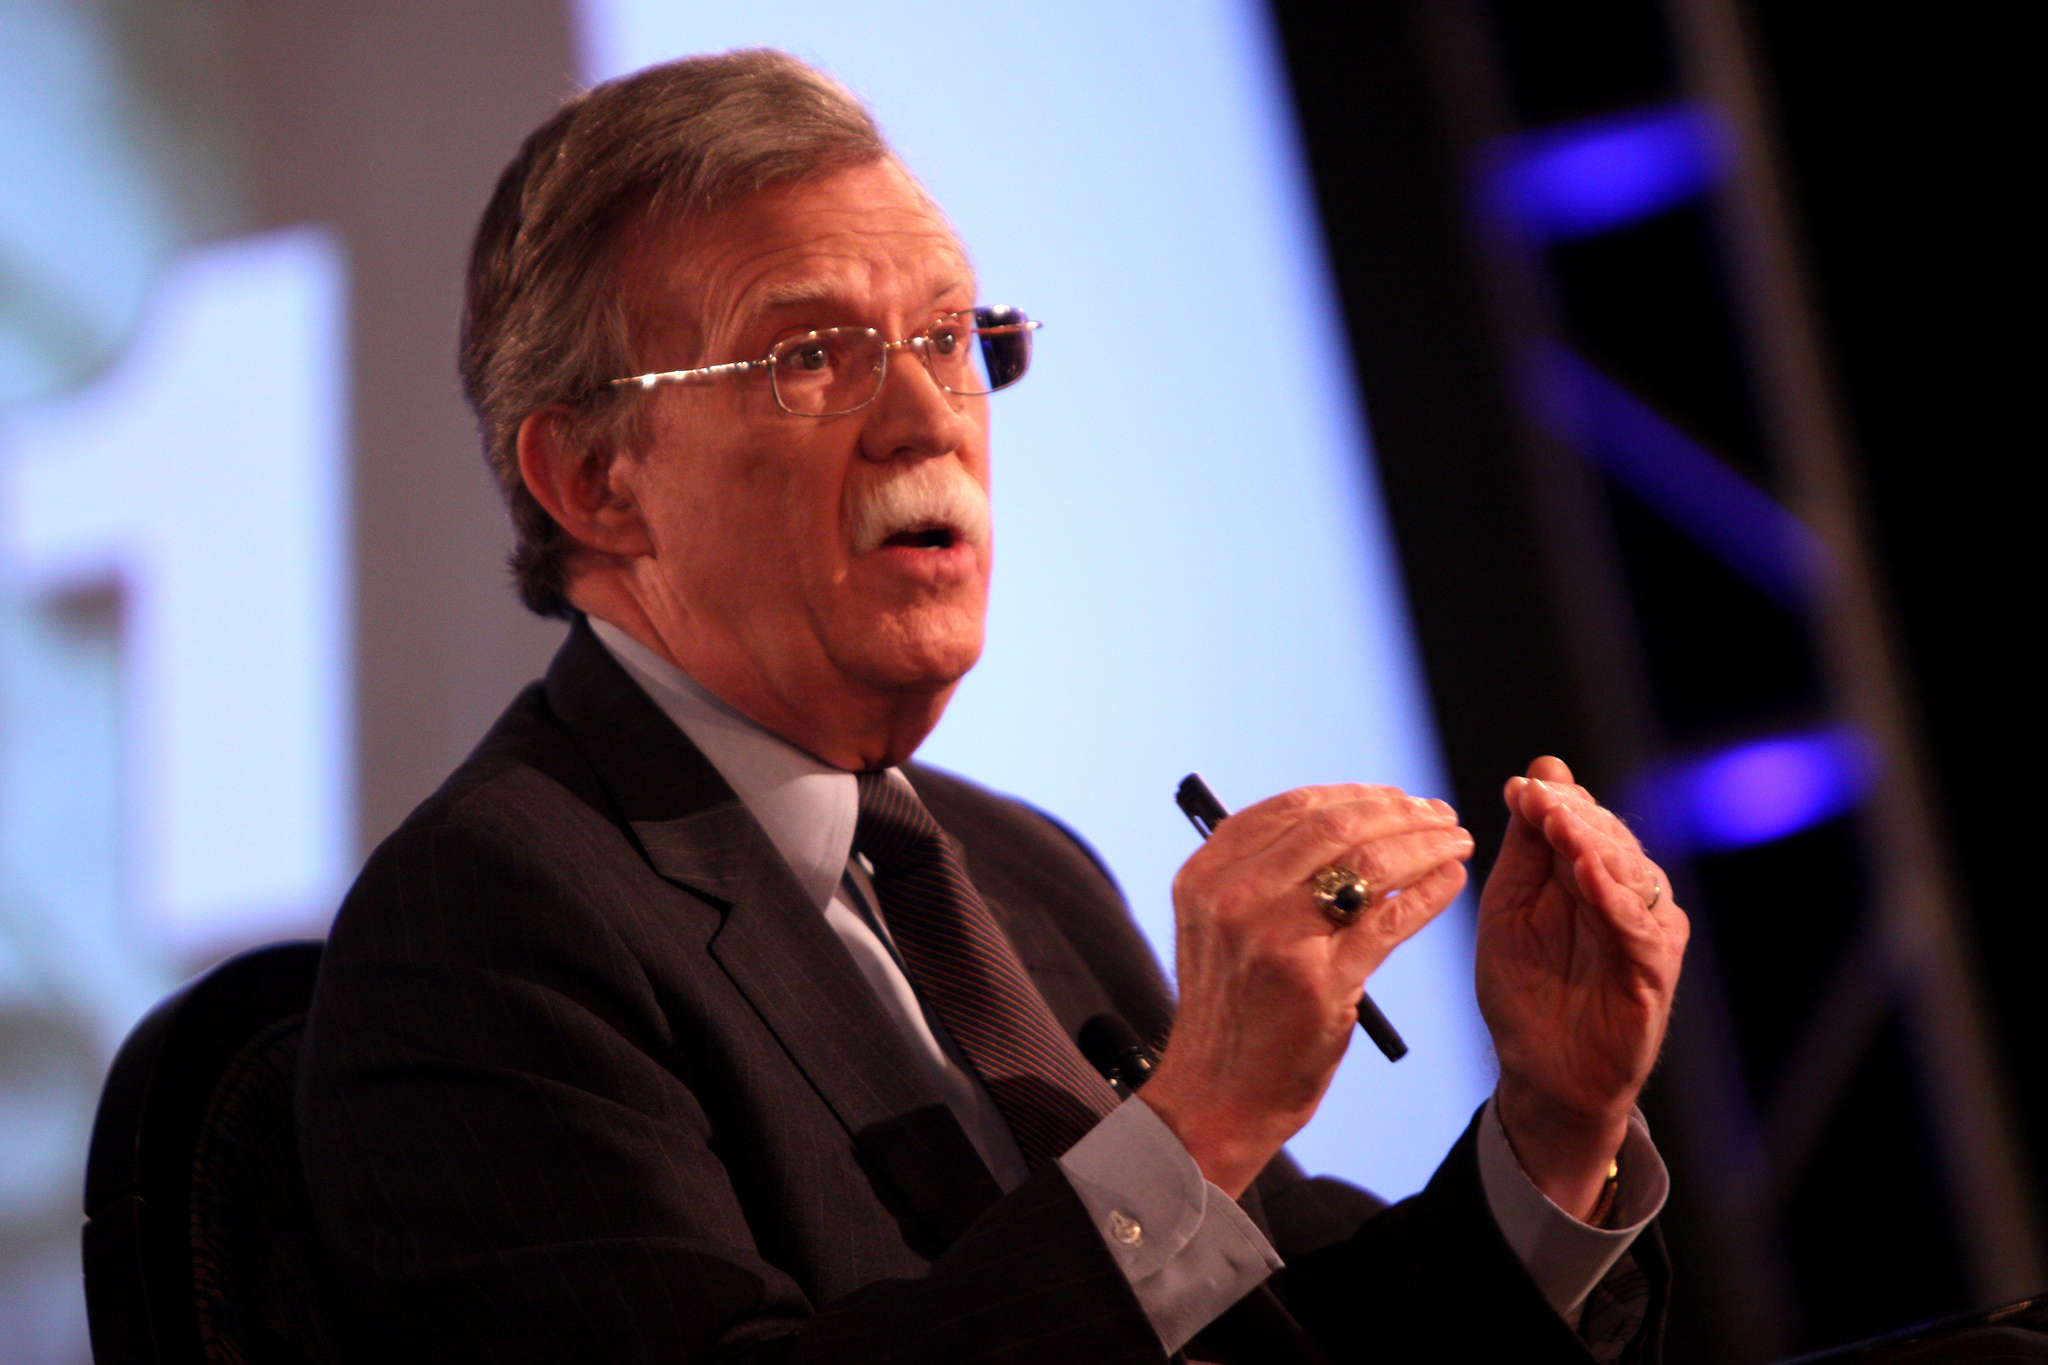 Phyllis Bennis on Debating John Bolton and Listening to Syrian Voices